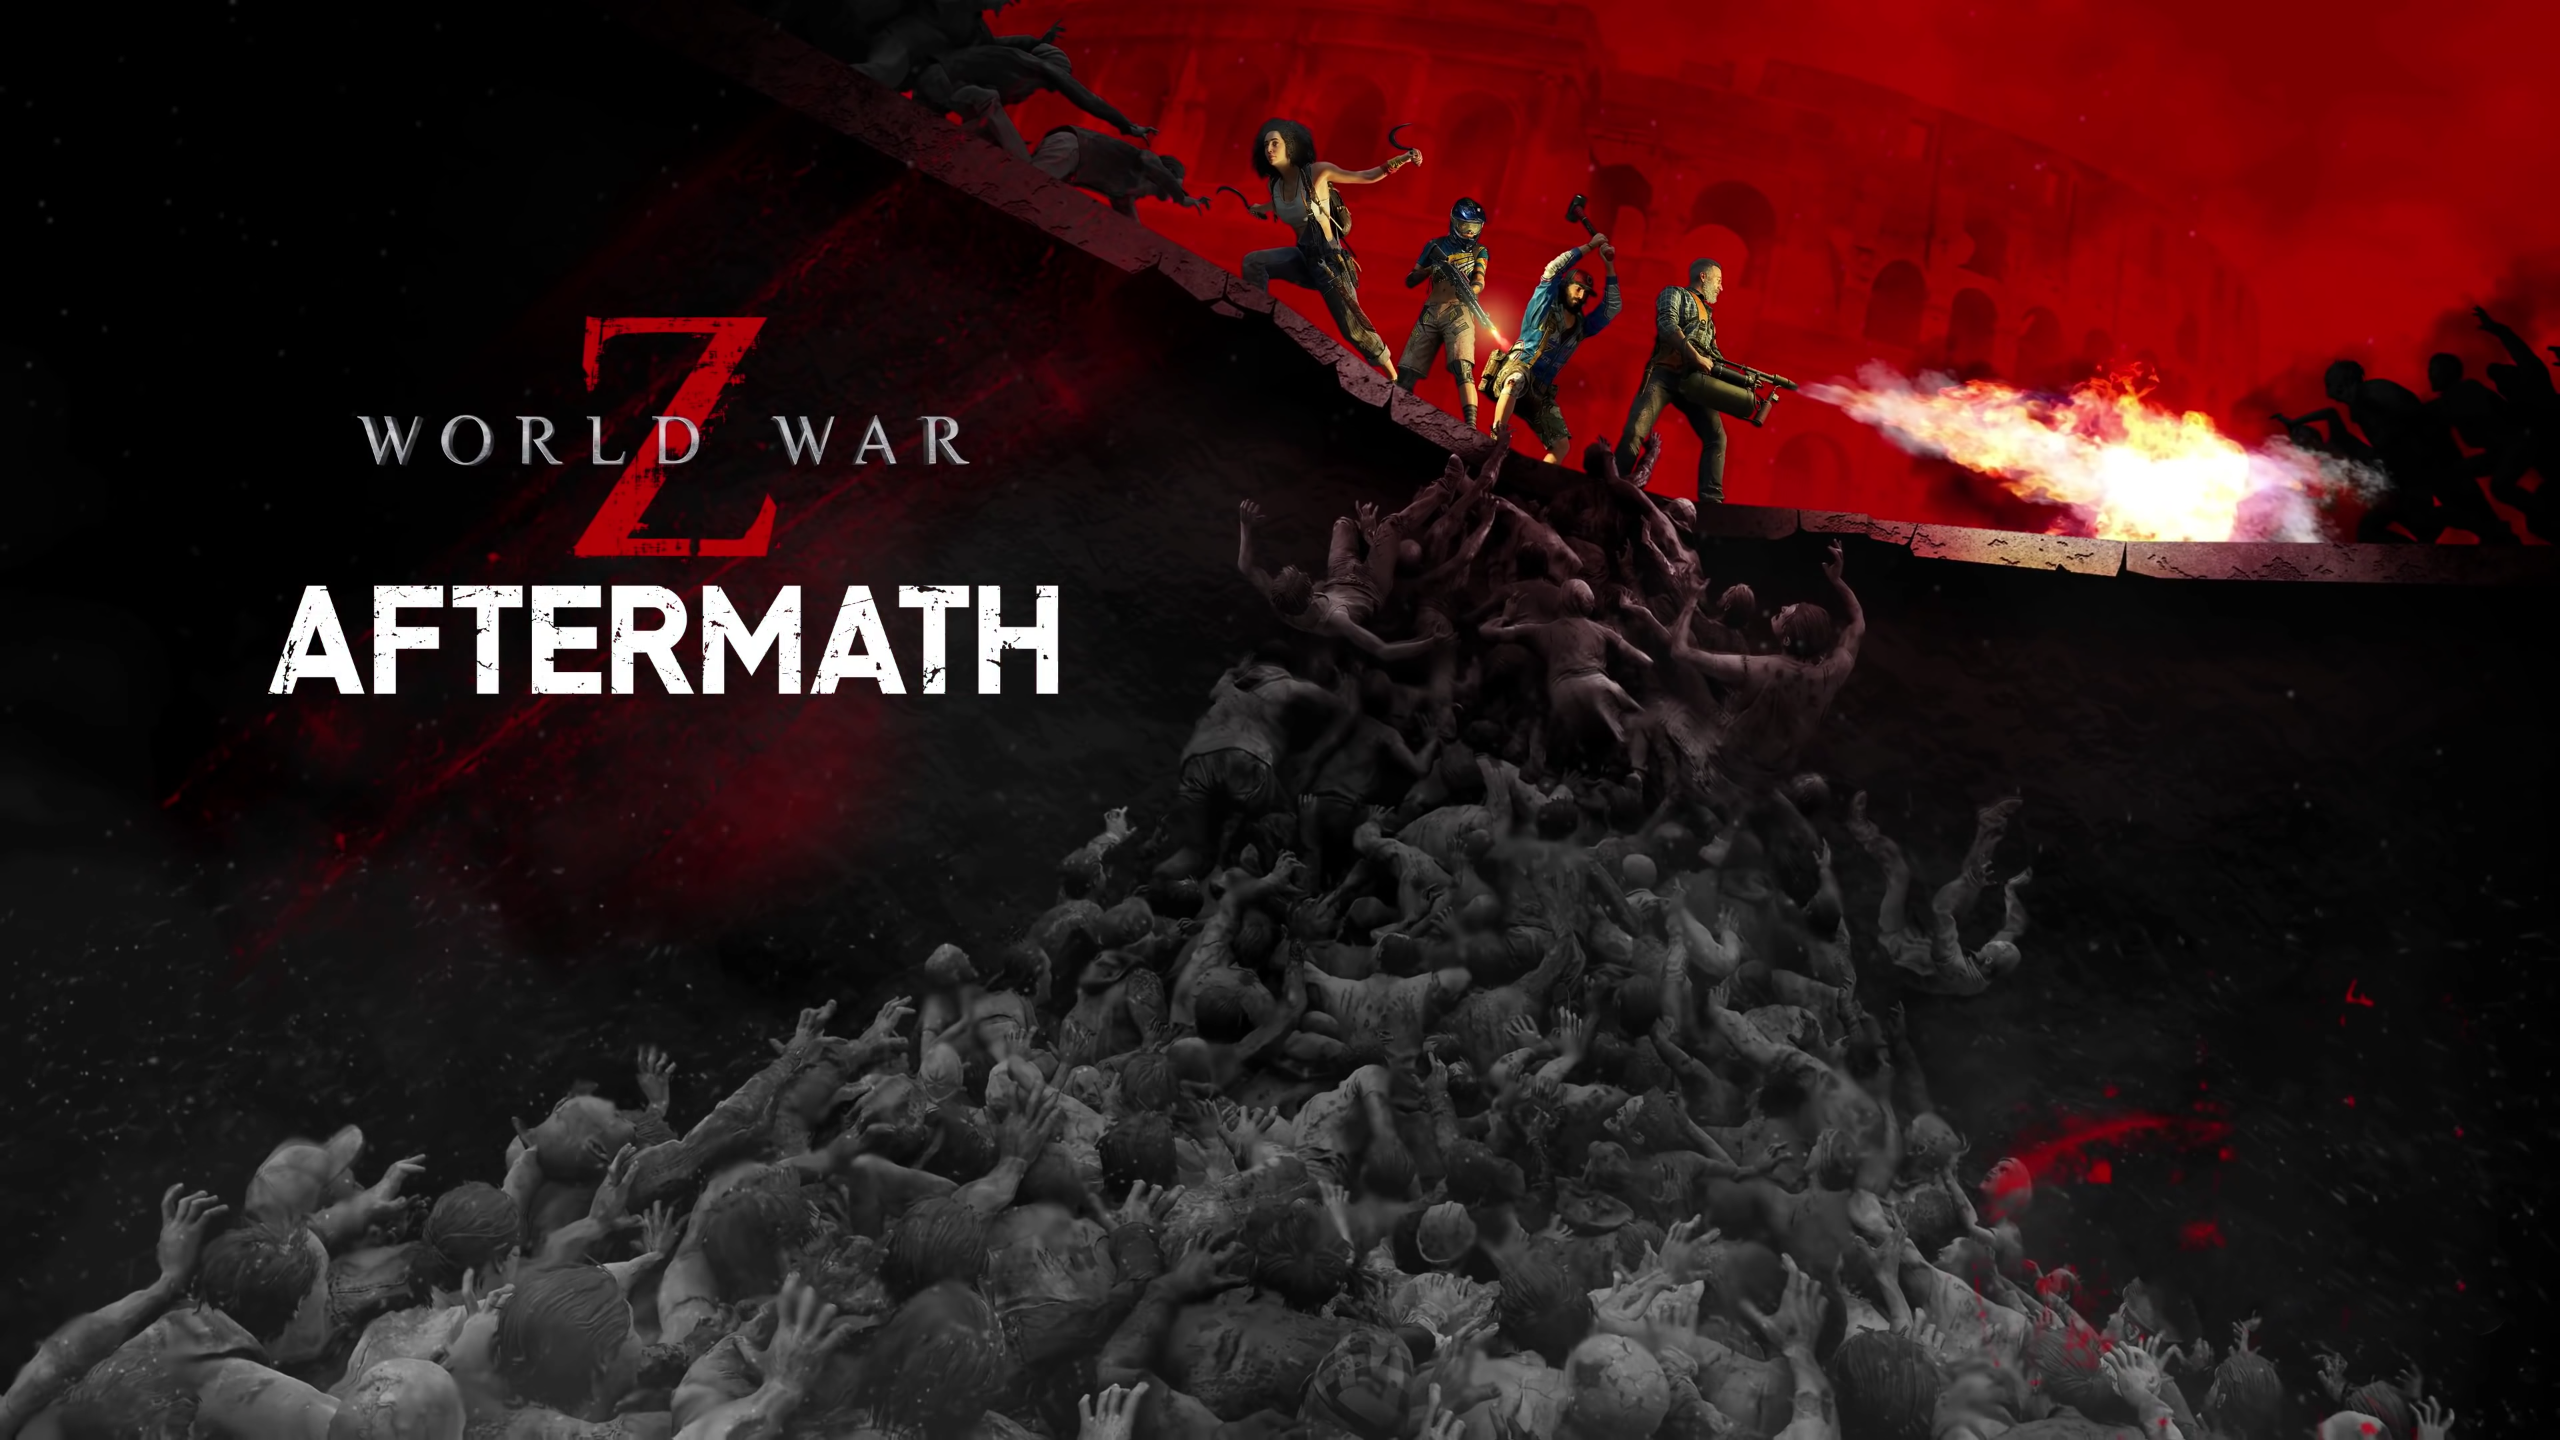 World War Z Aftermath HD Wallpaper And Background